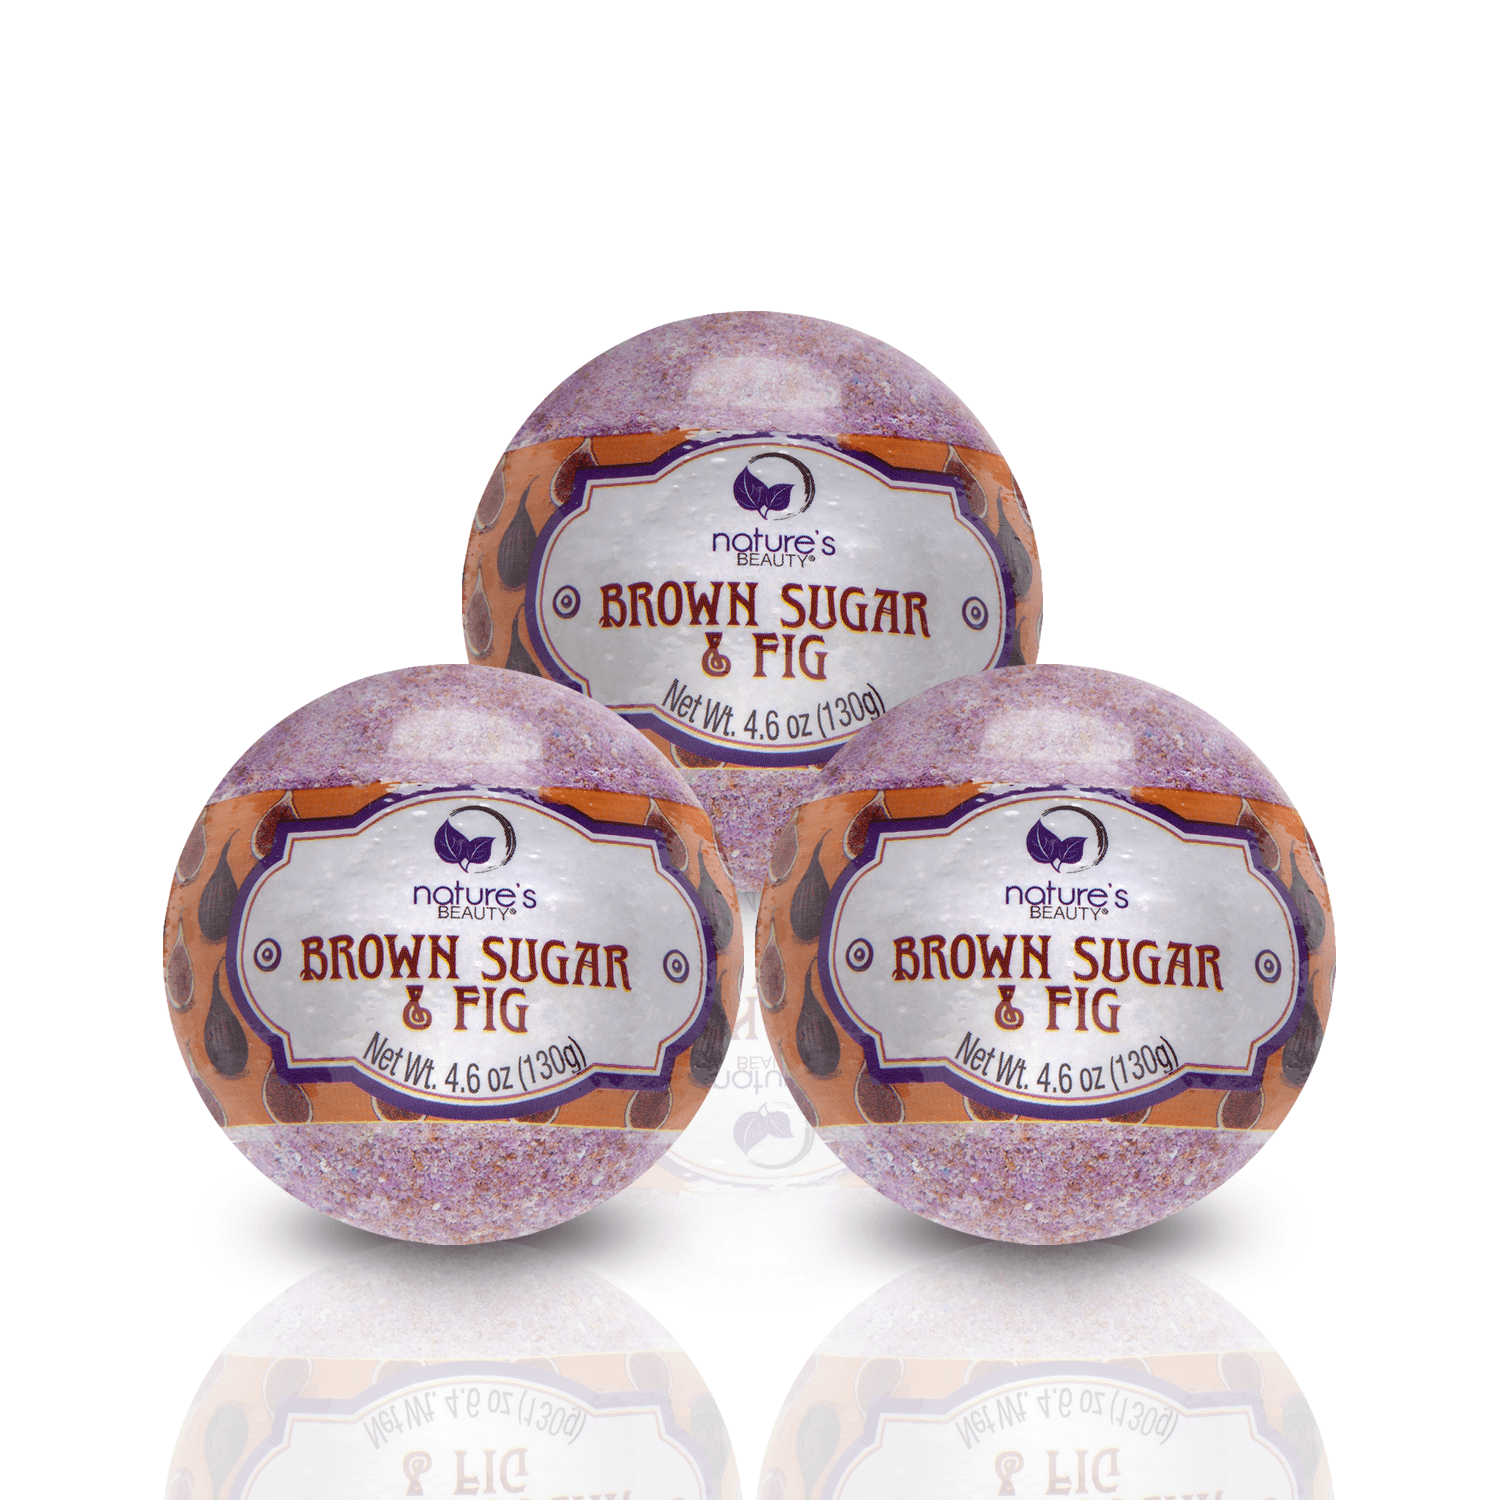 Brown Sugar & Fig Nature's Beauty Body Care Buy 2 Get 1 Free 